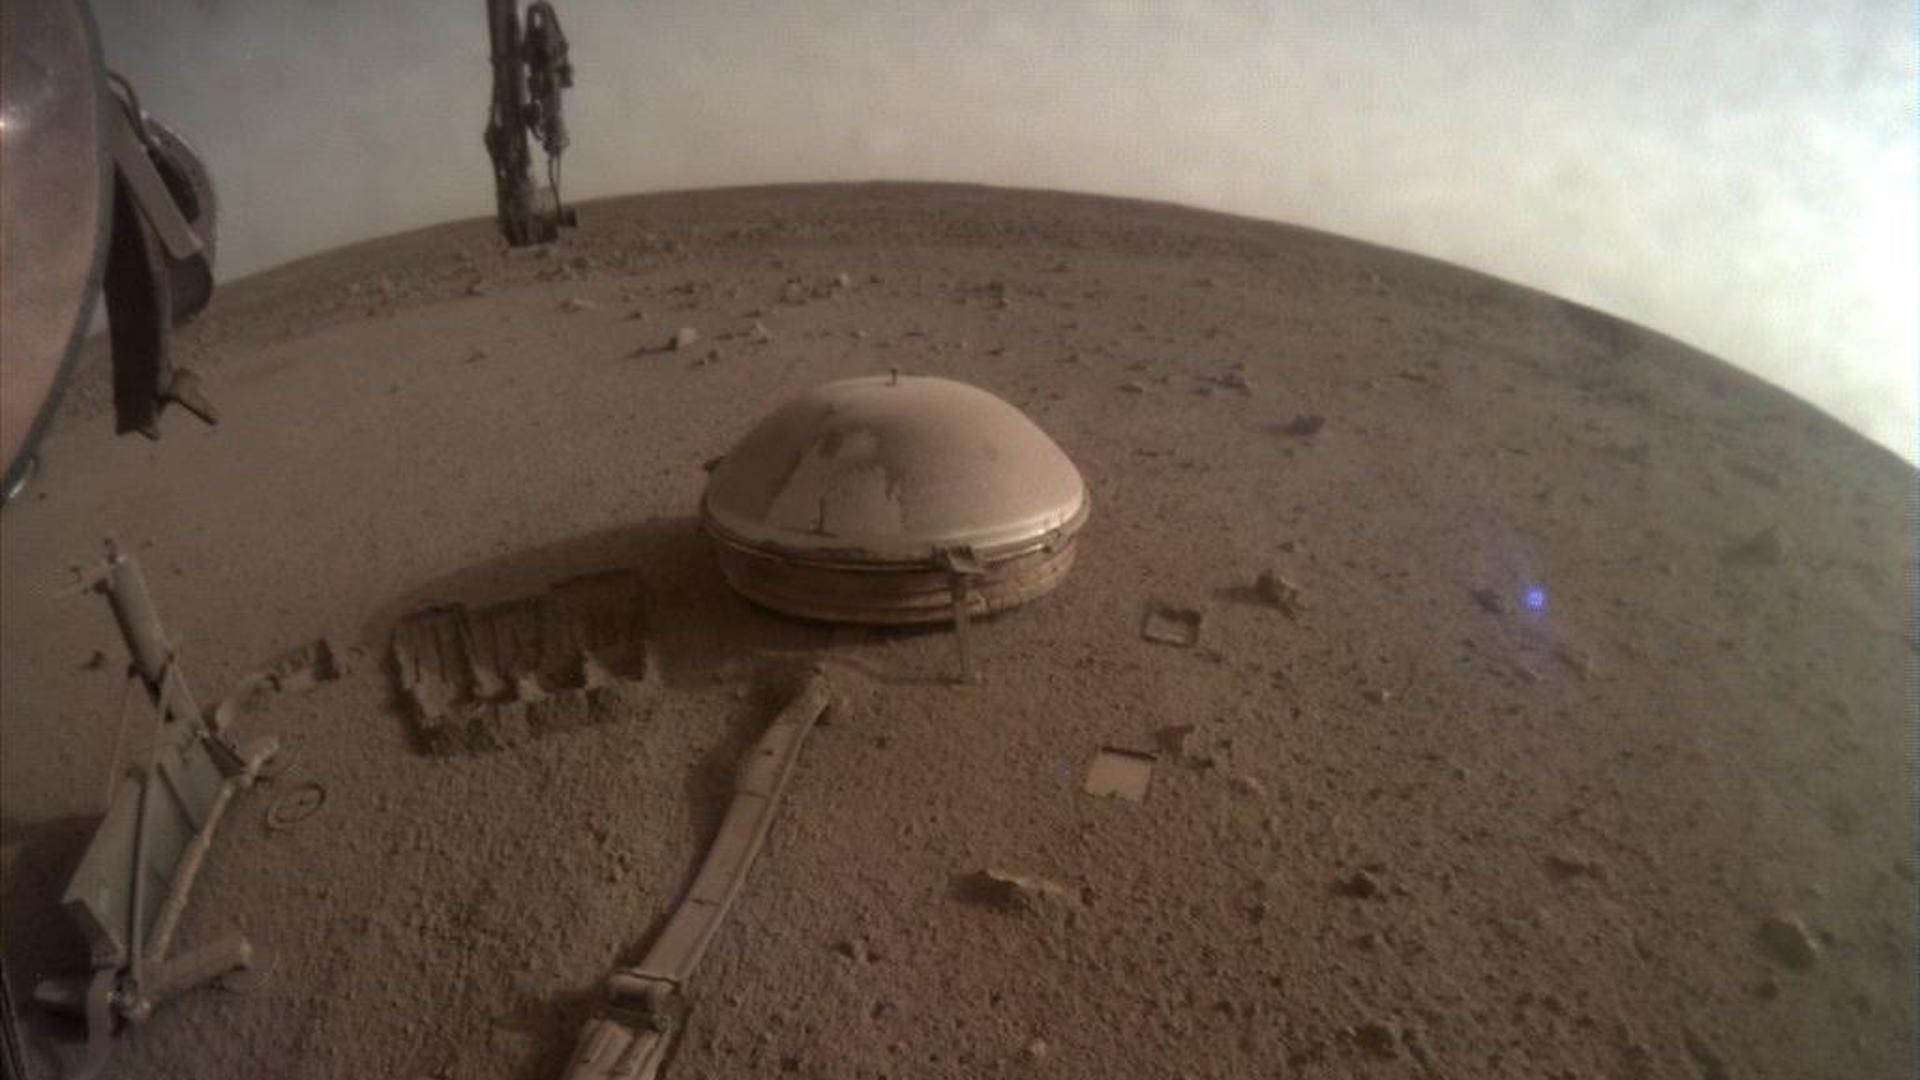 One of InSight's last images taken on Mars